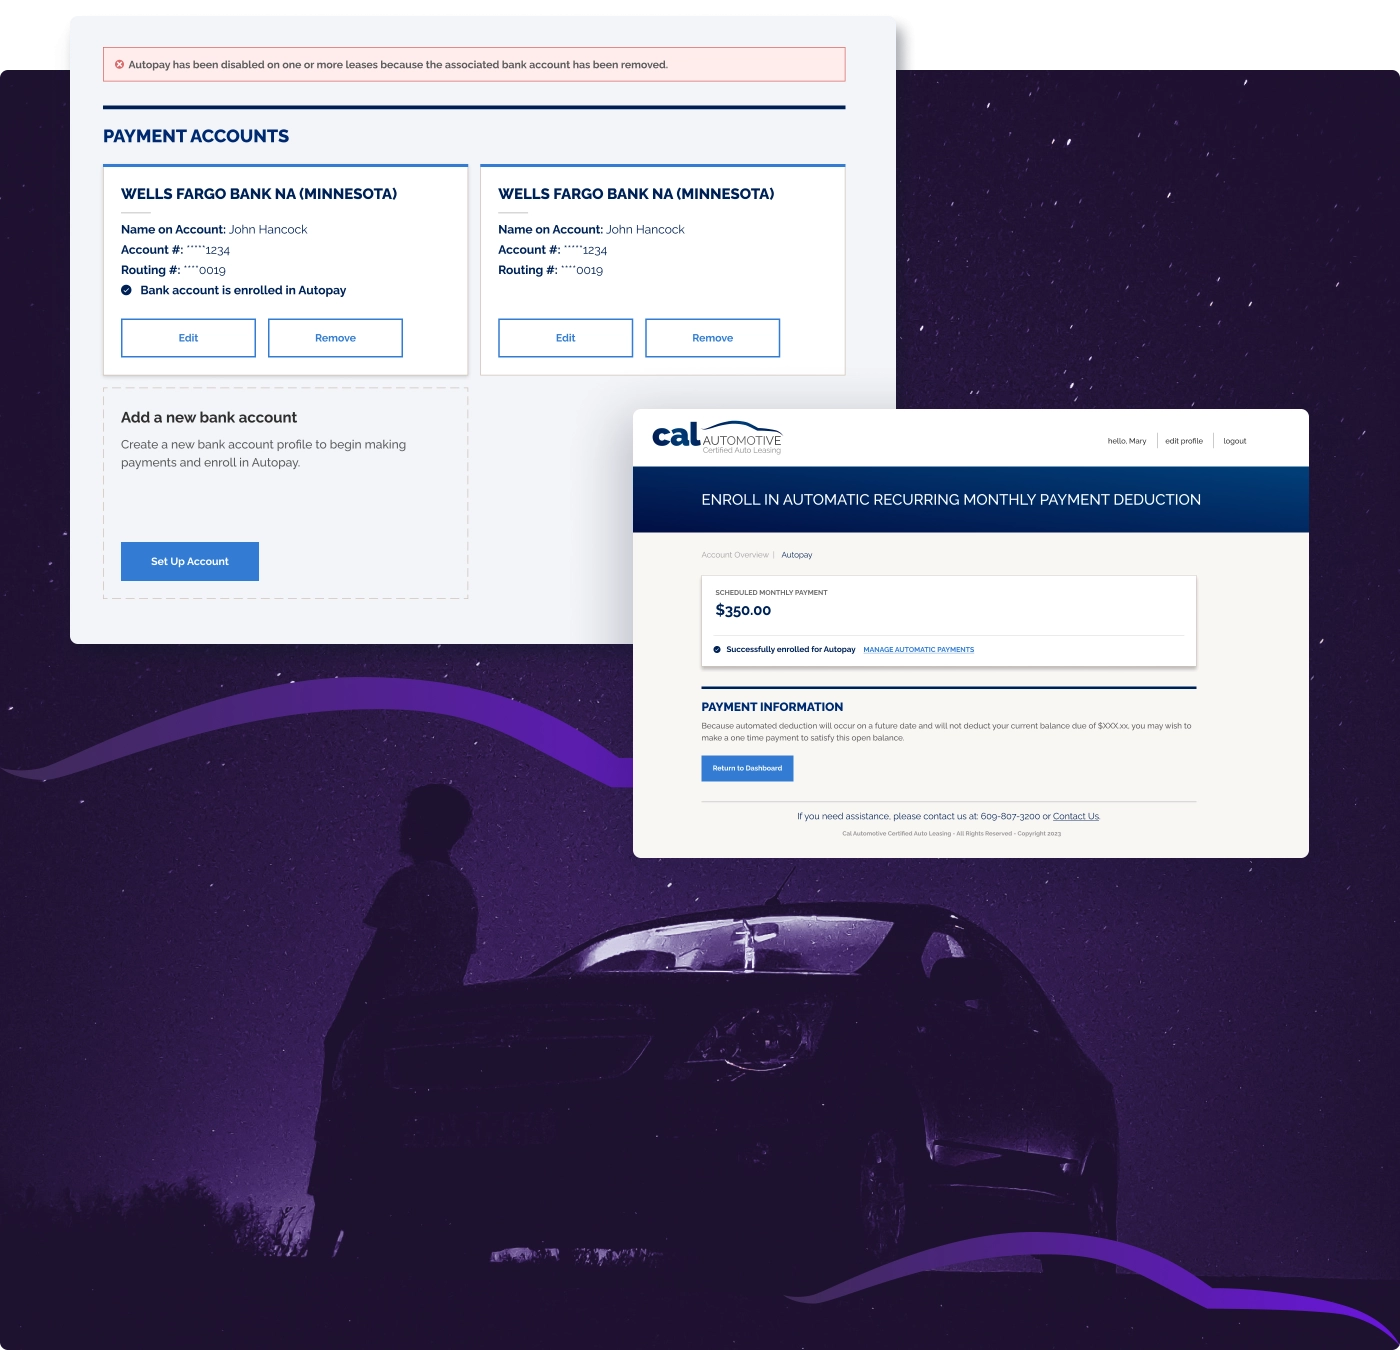 Desktop screenshots of Bank Account Dashboard overlaid on artistic silhouette of person leaning on a vehicle in on a starry night